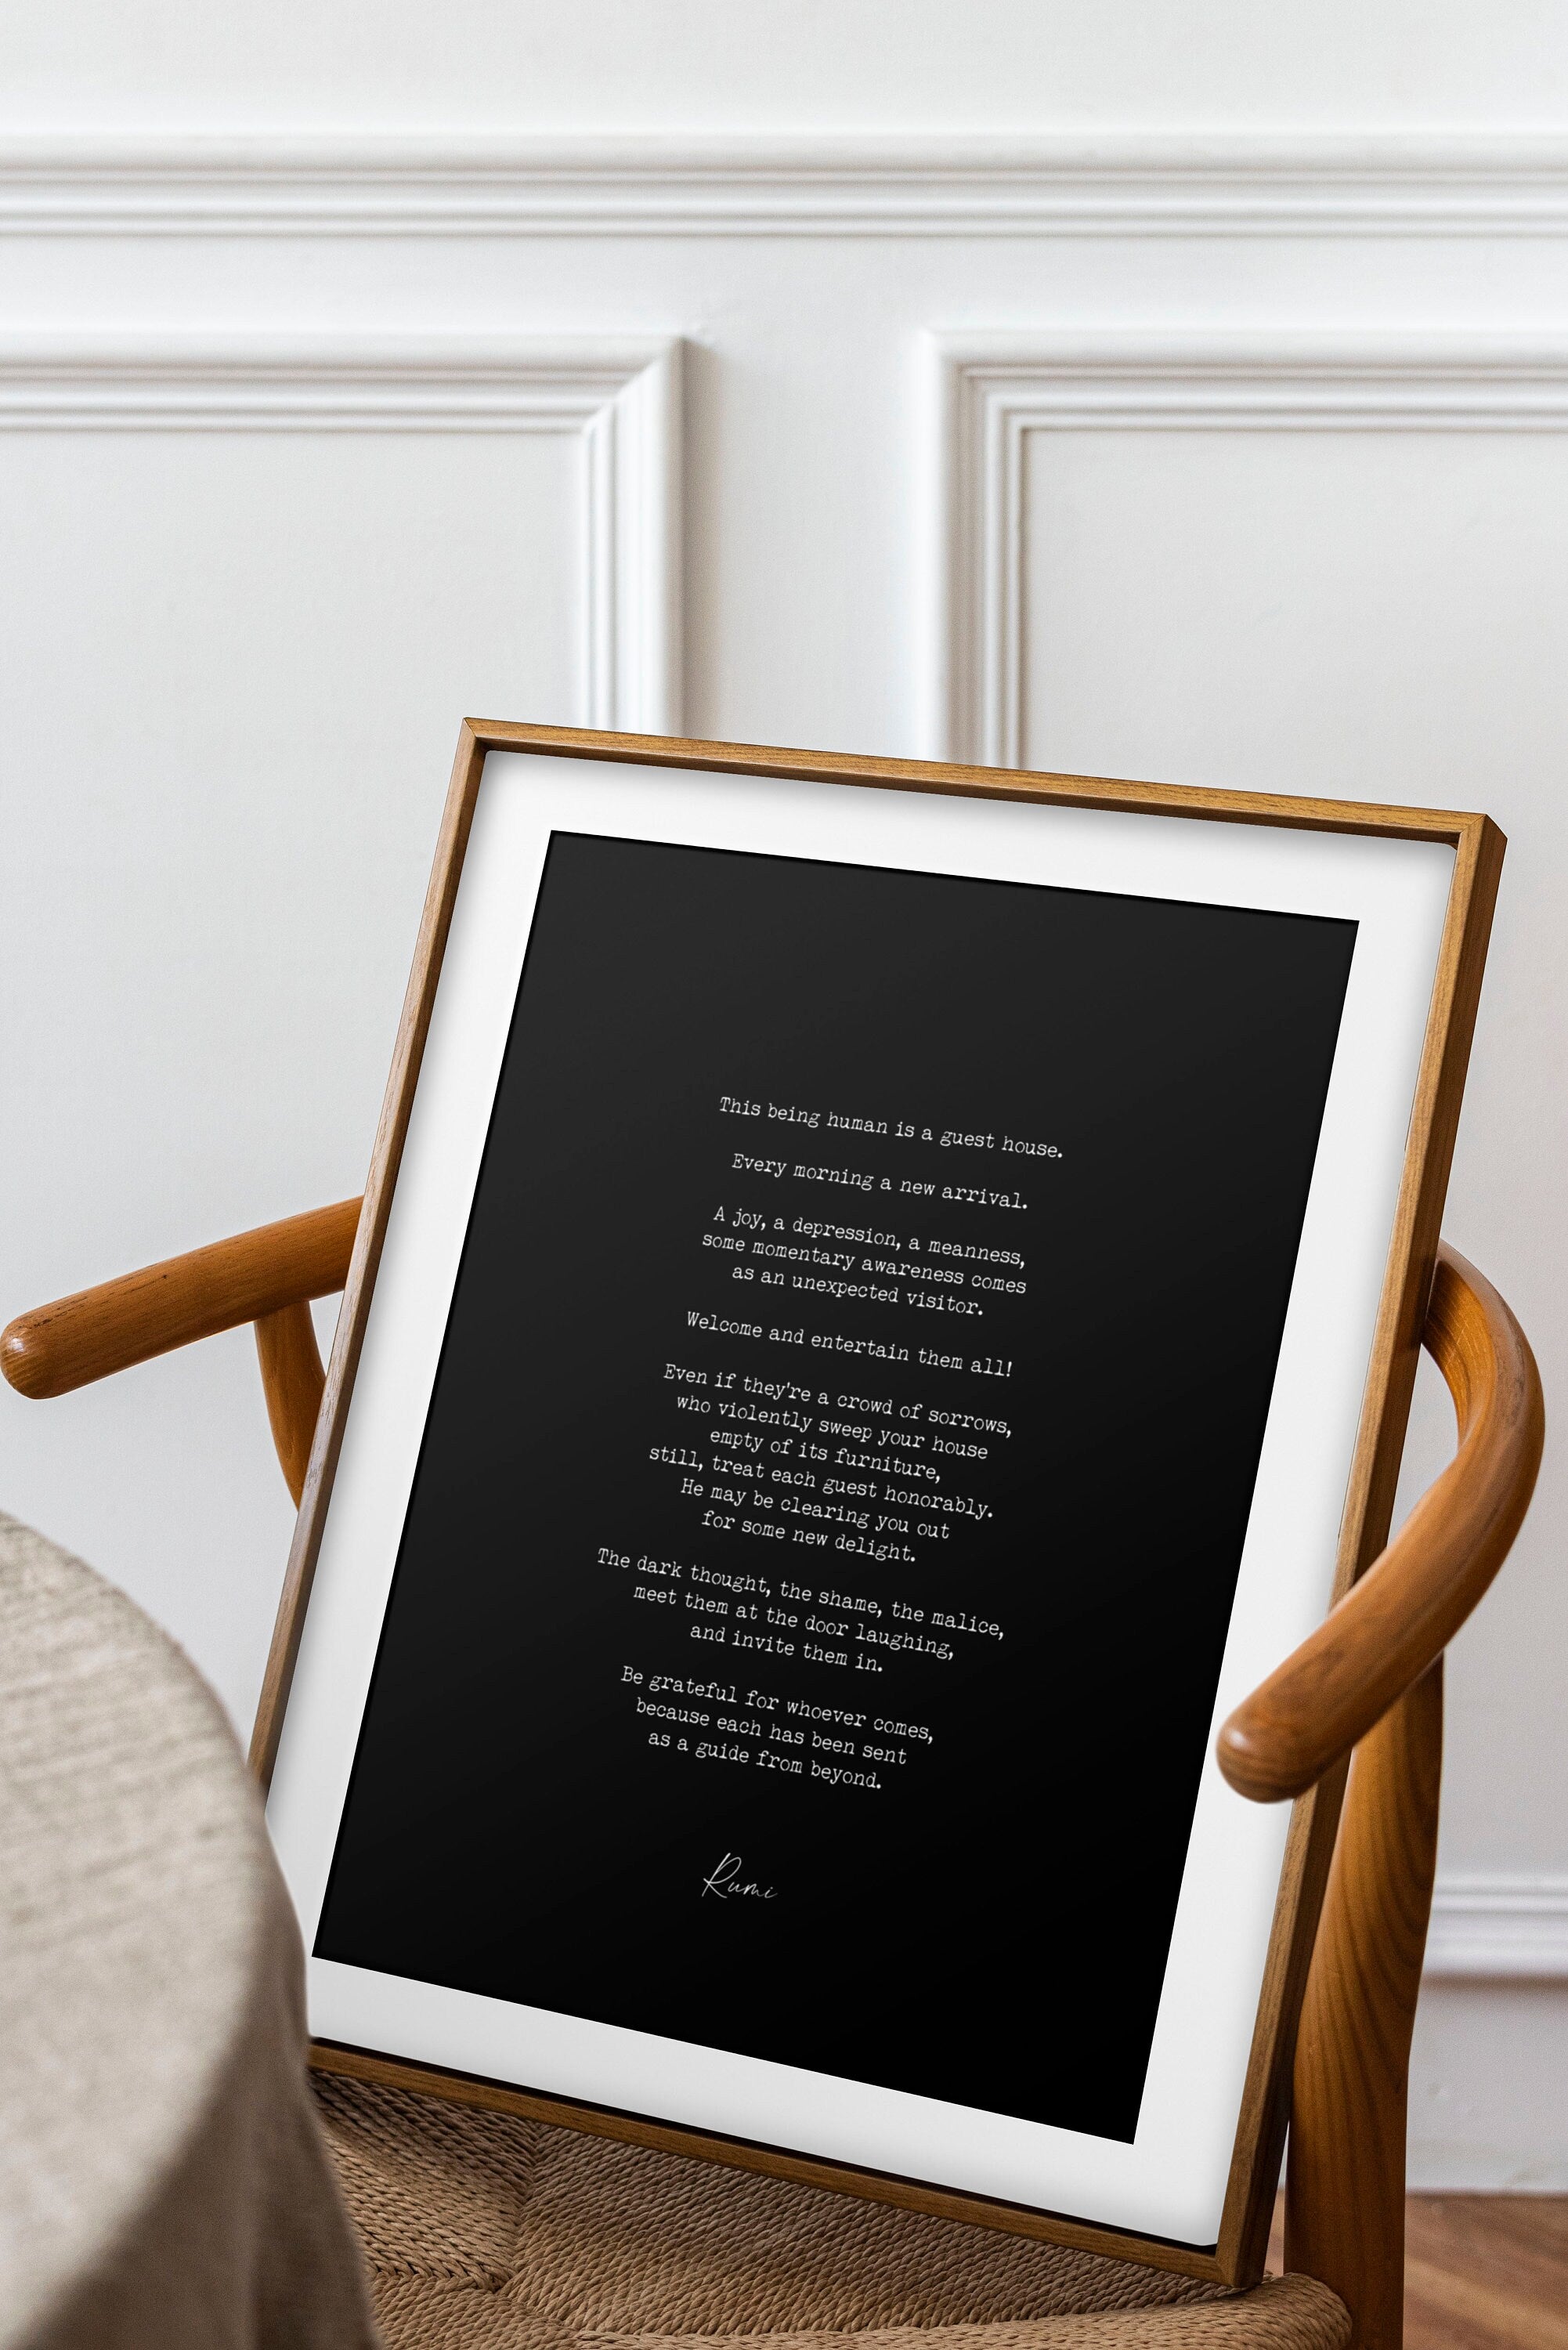 Rumi Inspirational Poetry Wall Art, Guesthouse Poem Minimalist Print Wall Decor